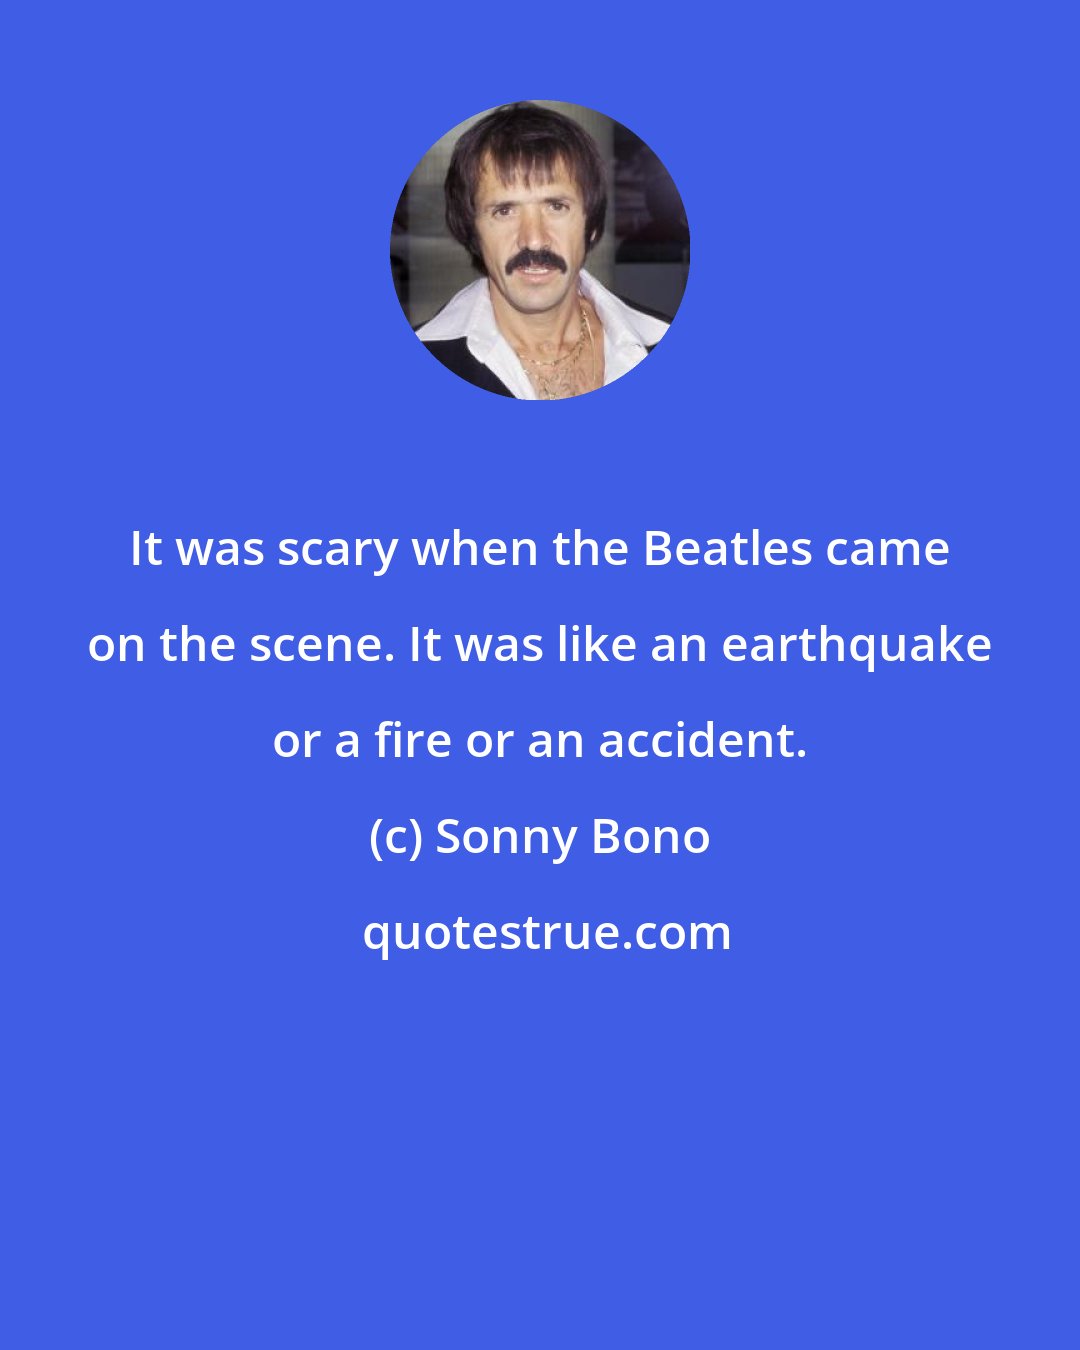 Sonny Bono: It was scary when the Beatles came on the scene. It was like an earthquake or a fire or an accident.